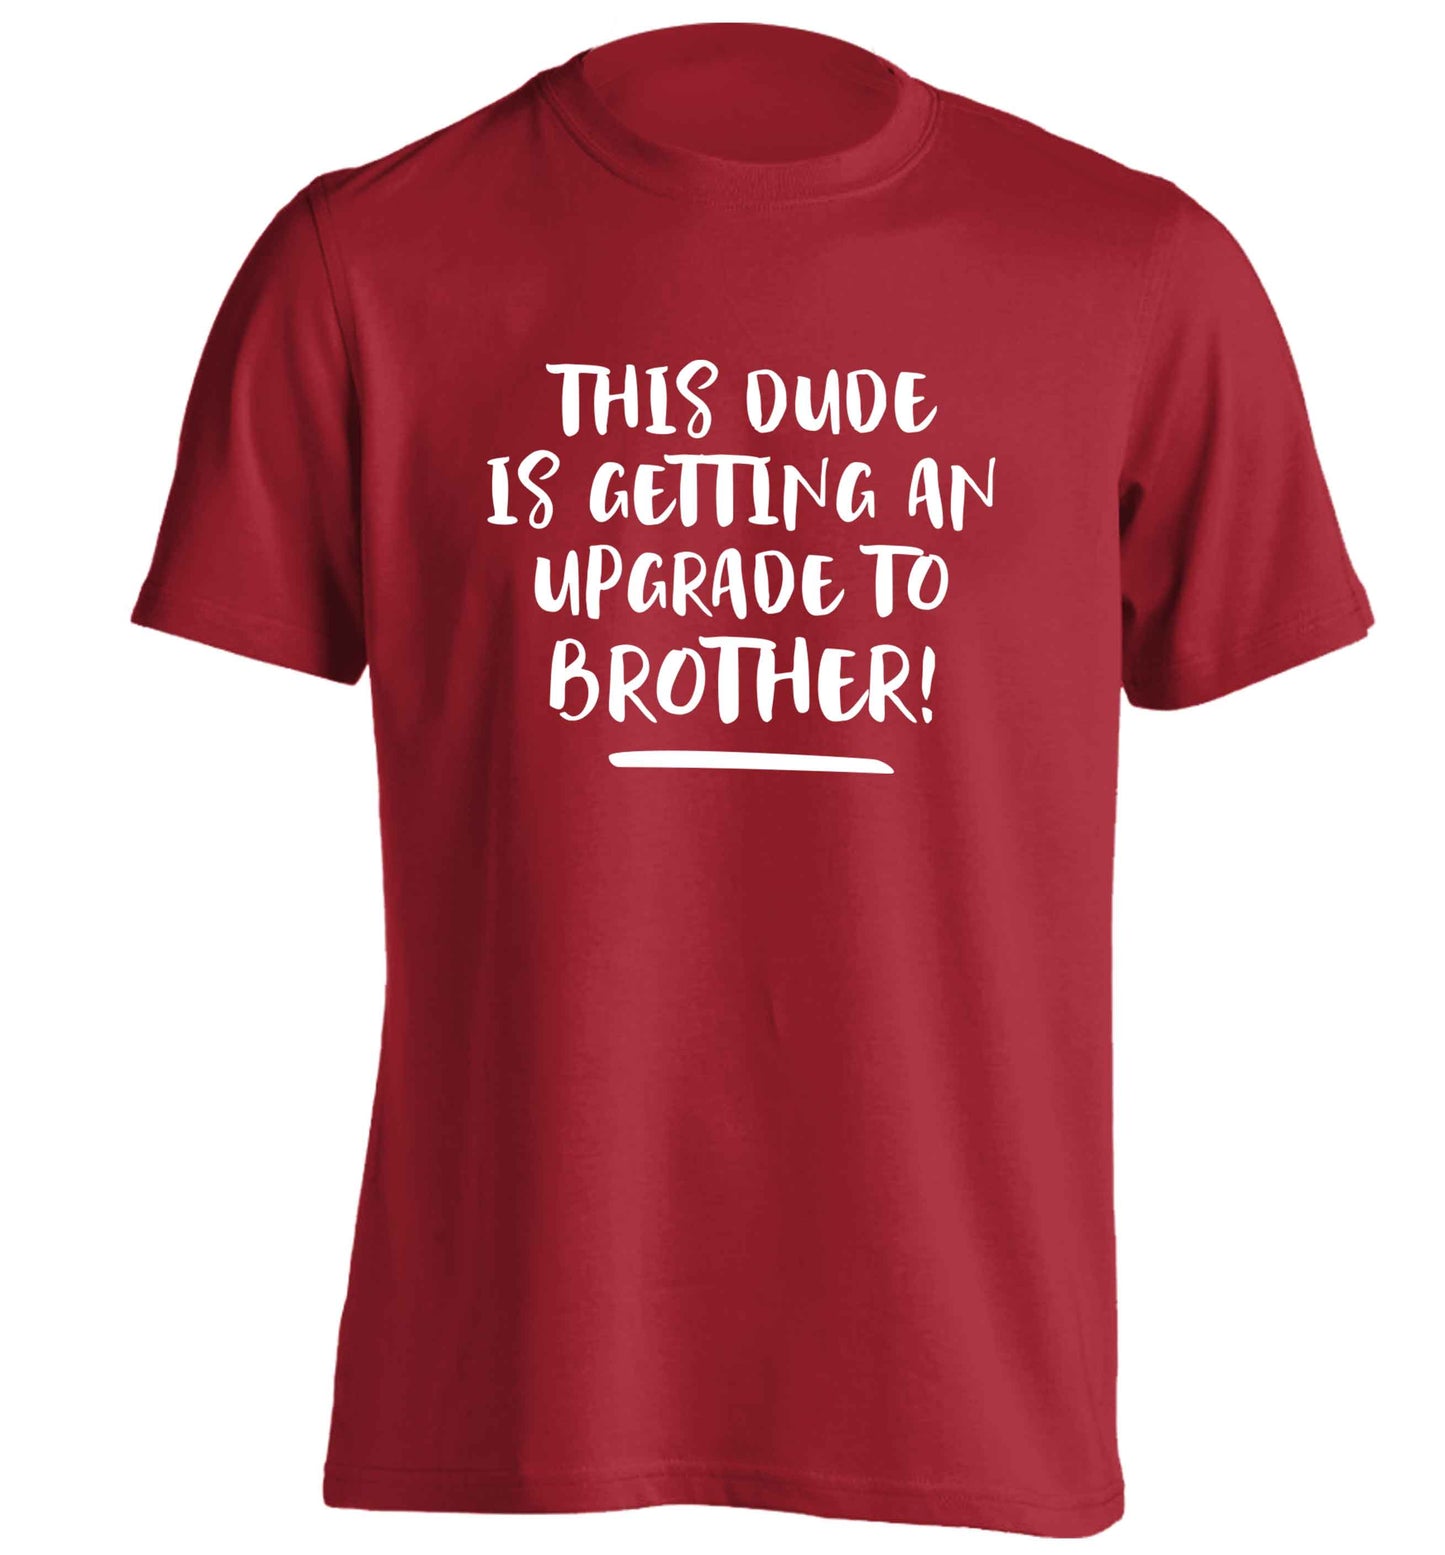 This dude is getting an upgrade to brother! adults unisex red Tshirt 2XL